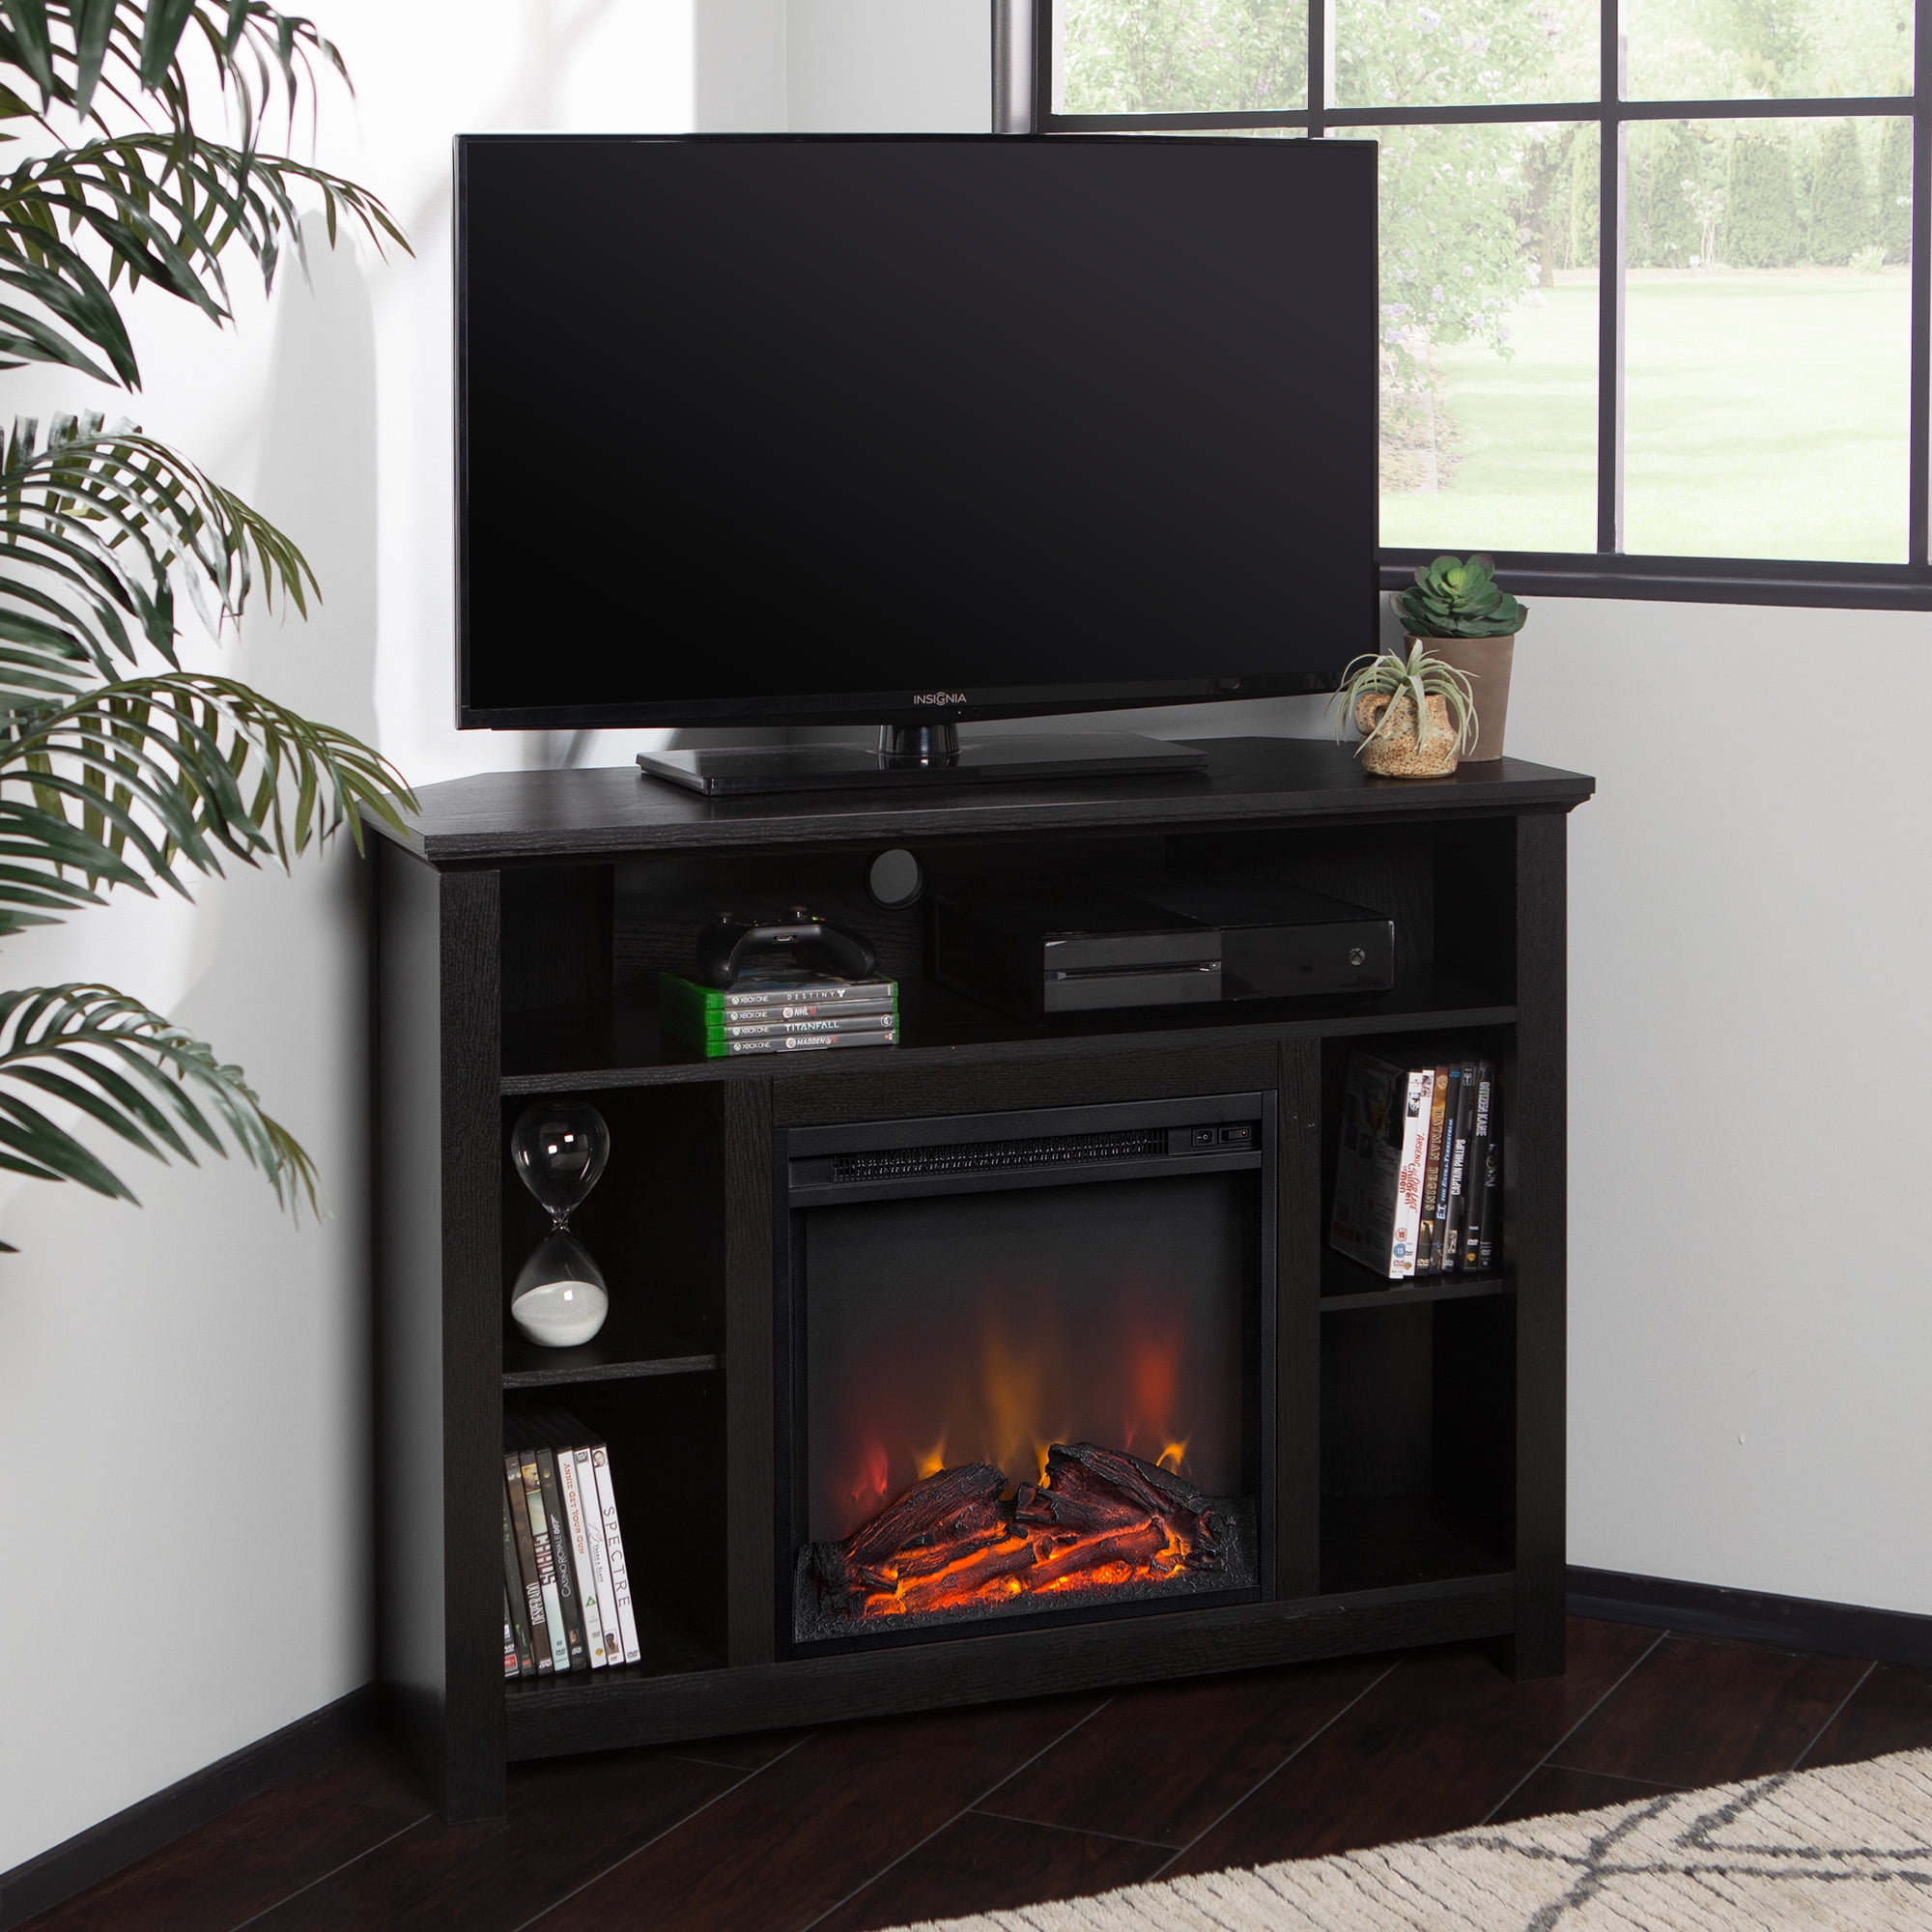 Manor Park Tall Corner Fireplace Tv, 60 Inch Corner Tv Stand With Fireplace